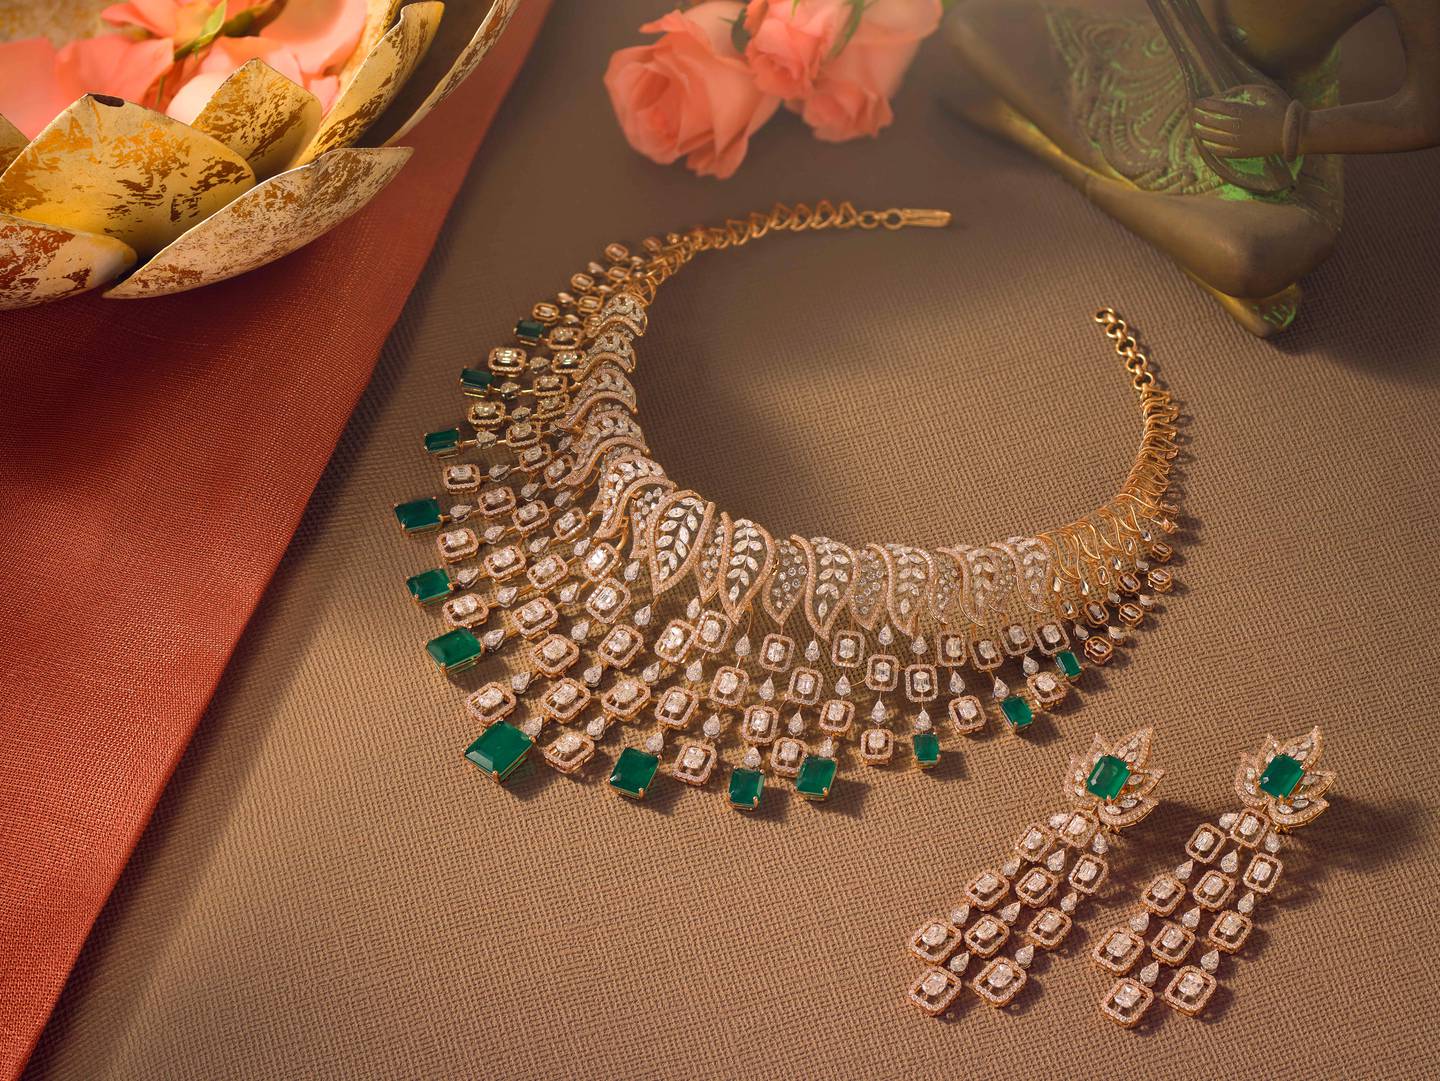 A Malabar Gold & Diamonds diamond necklace with earrings.